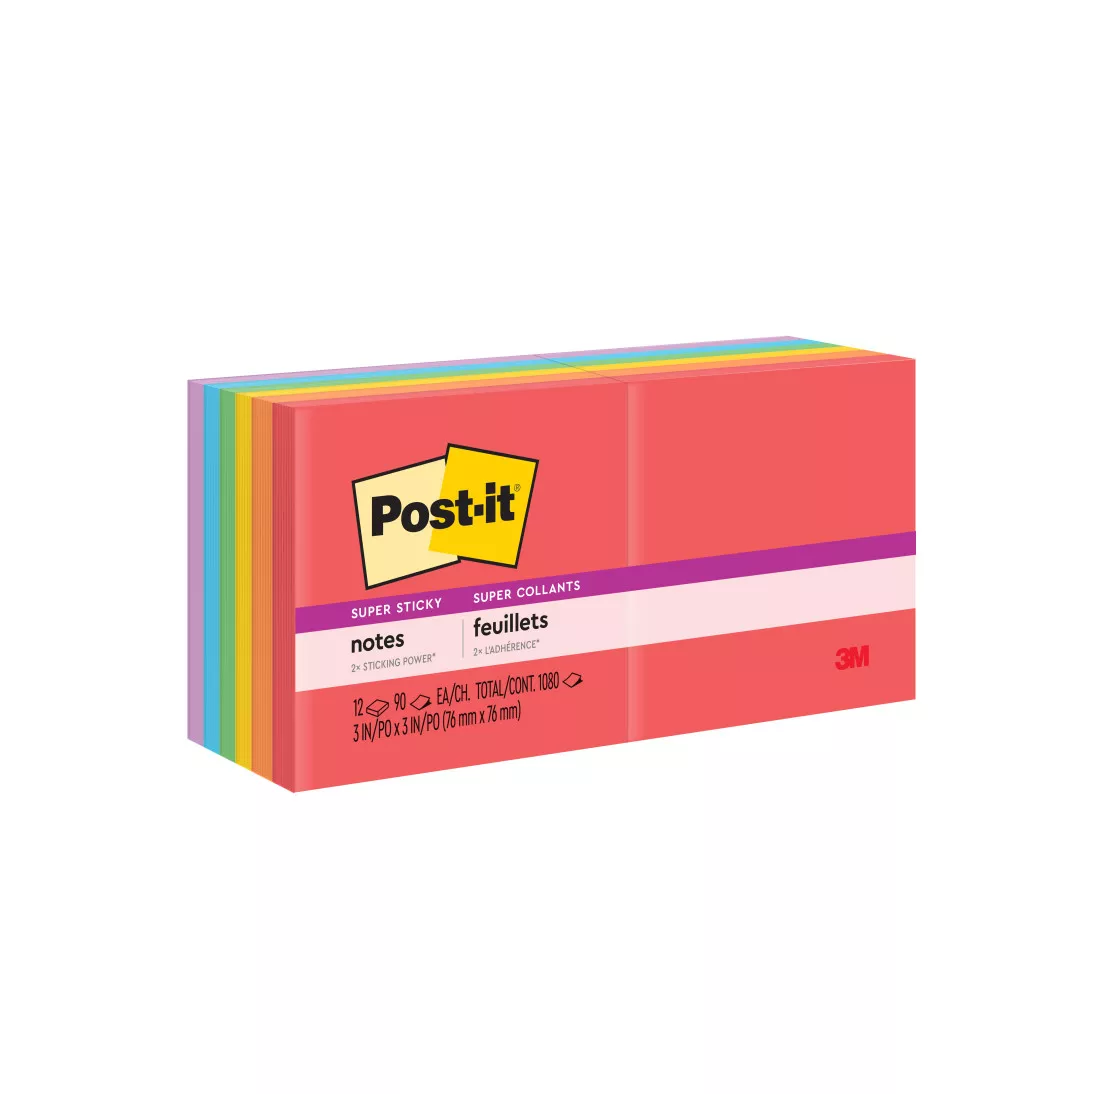 Post-it® Super Sticky Notes 654-12SSAN, 3 in x 3 in (76 mm x 76 mm)
Marrakesh Collection